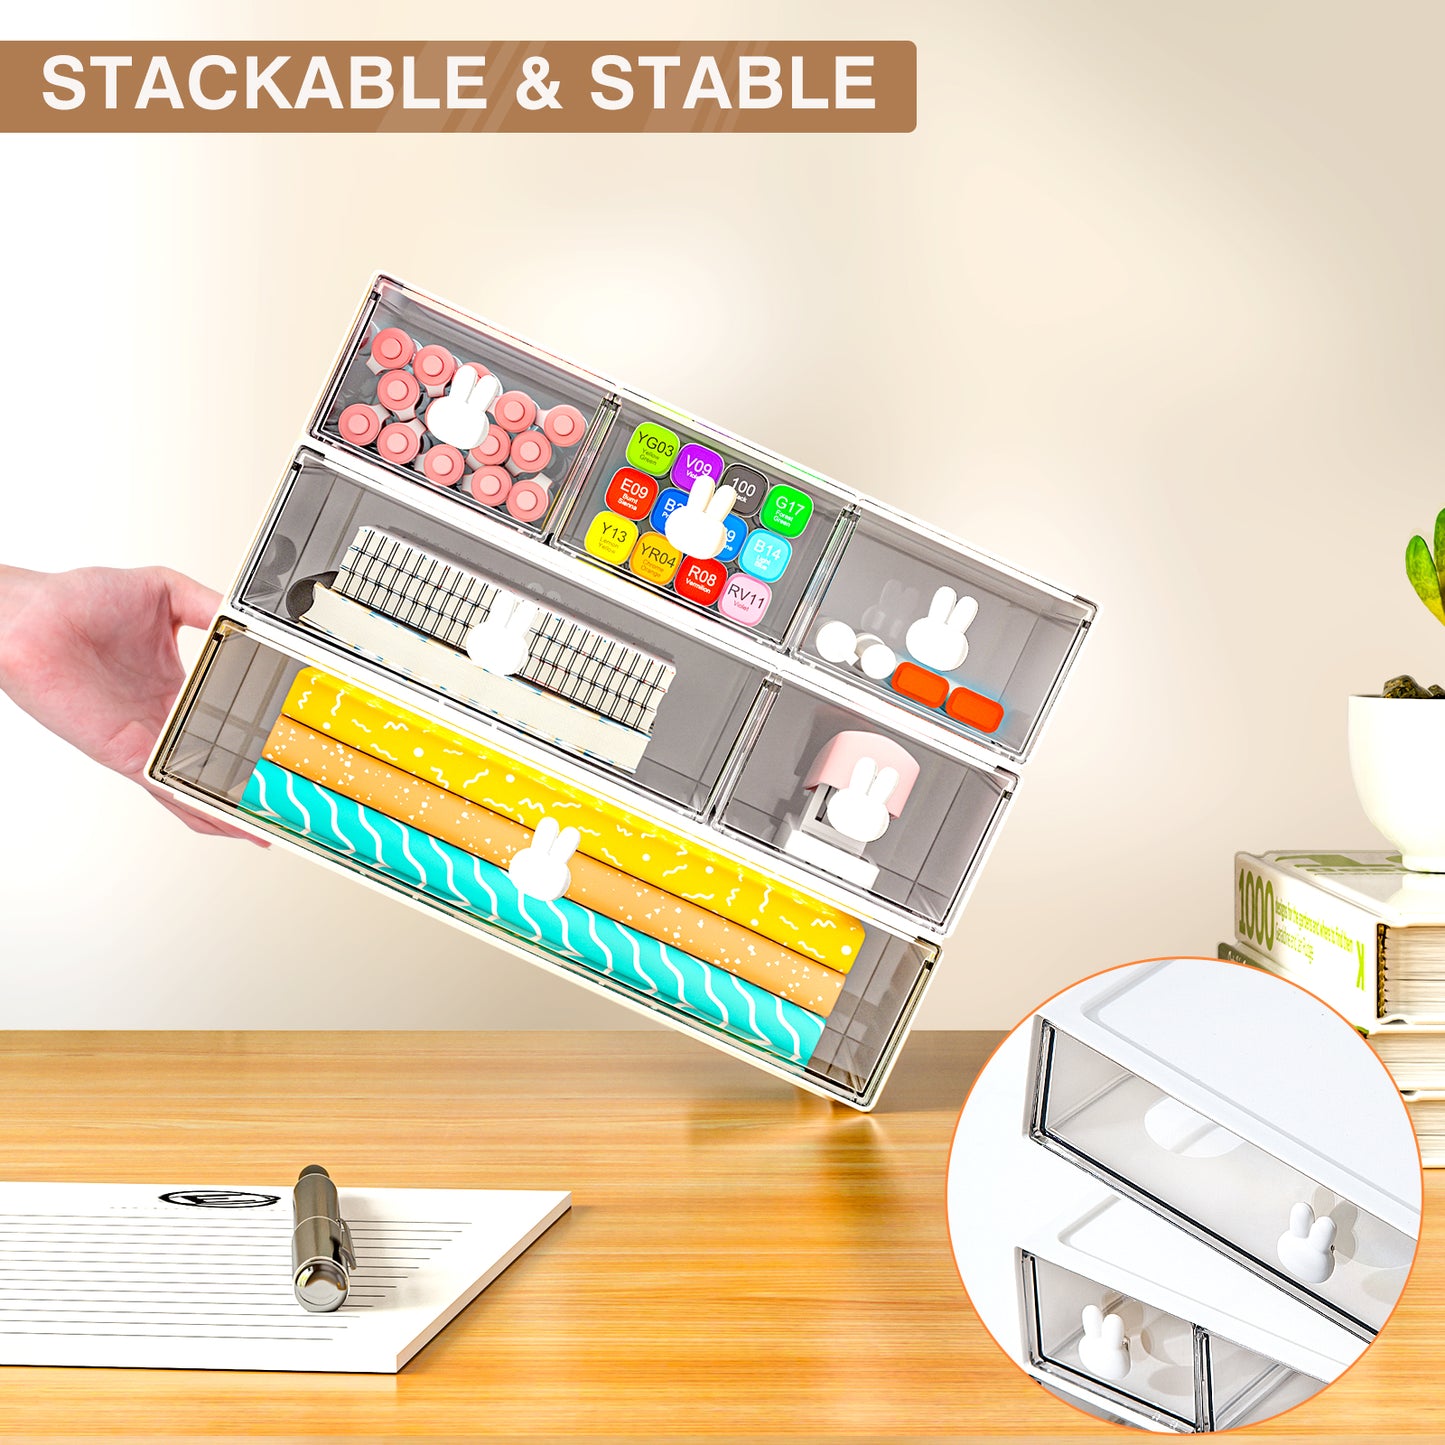 GoMaihe 3pcs Stackable Desk Organizer with Drawers Multifunctional Organizer Box(M)